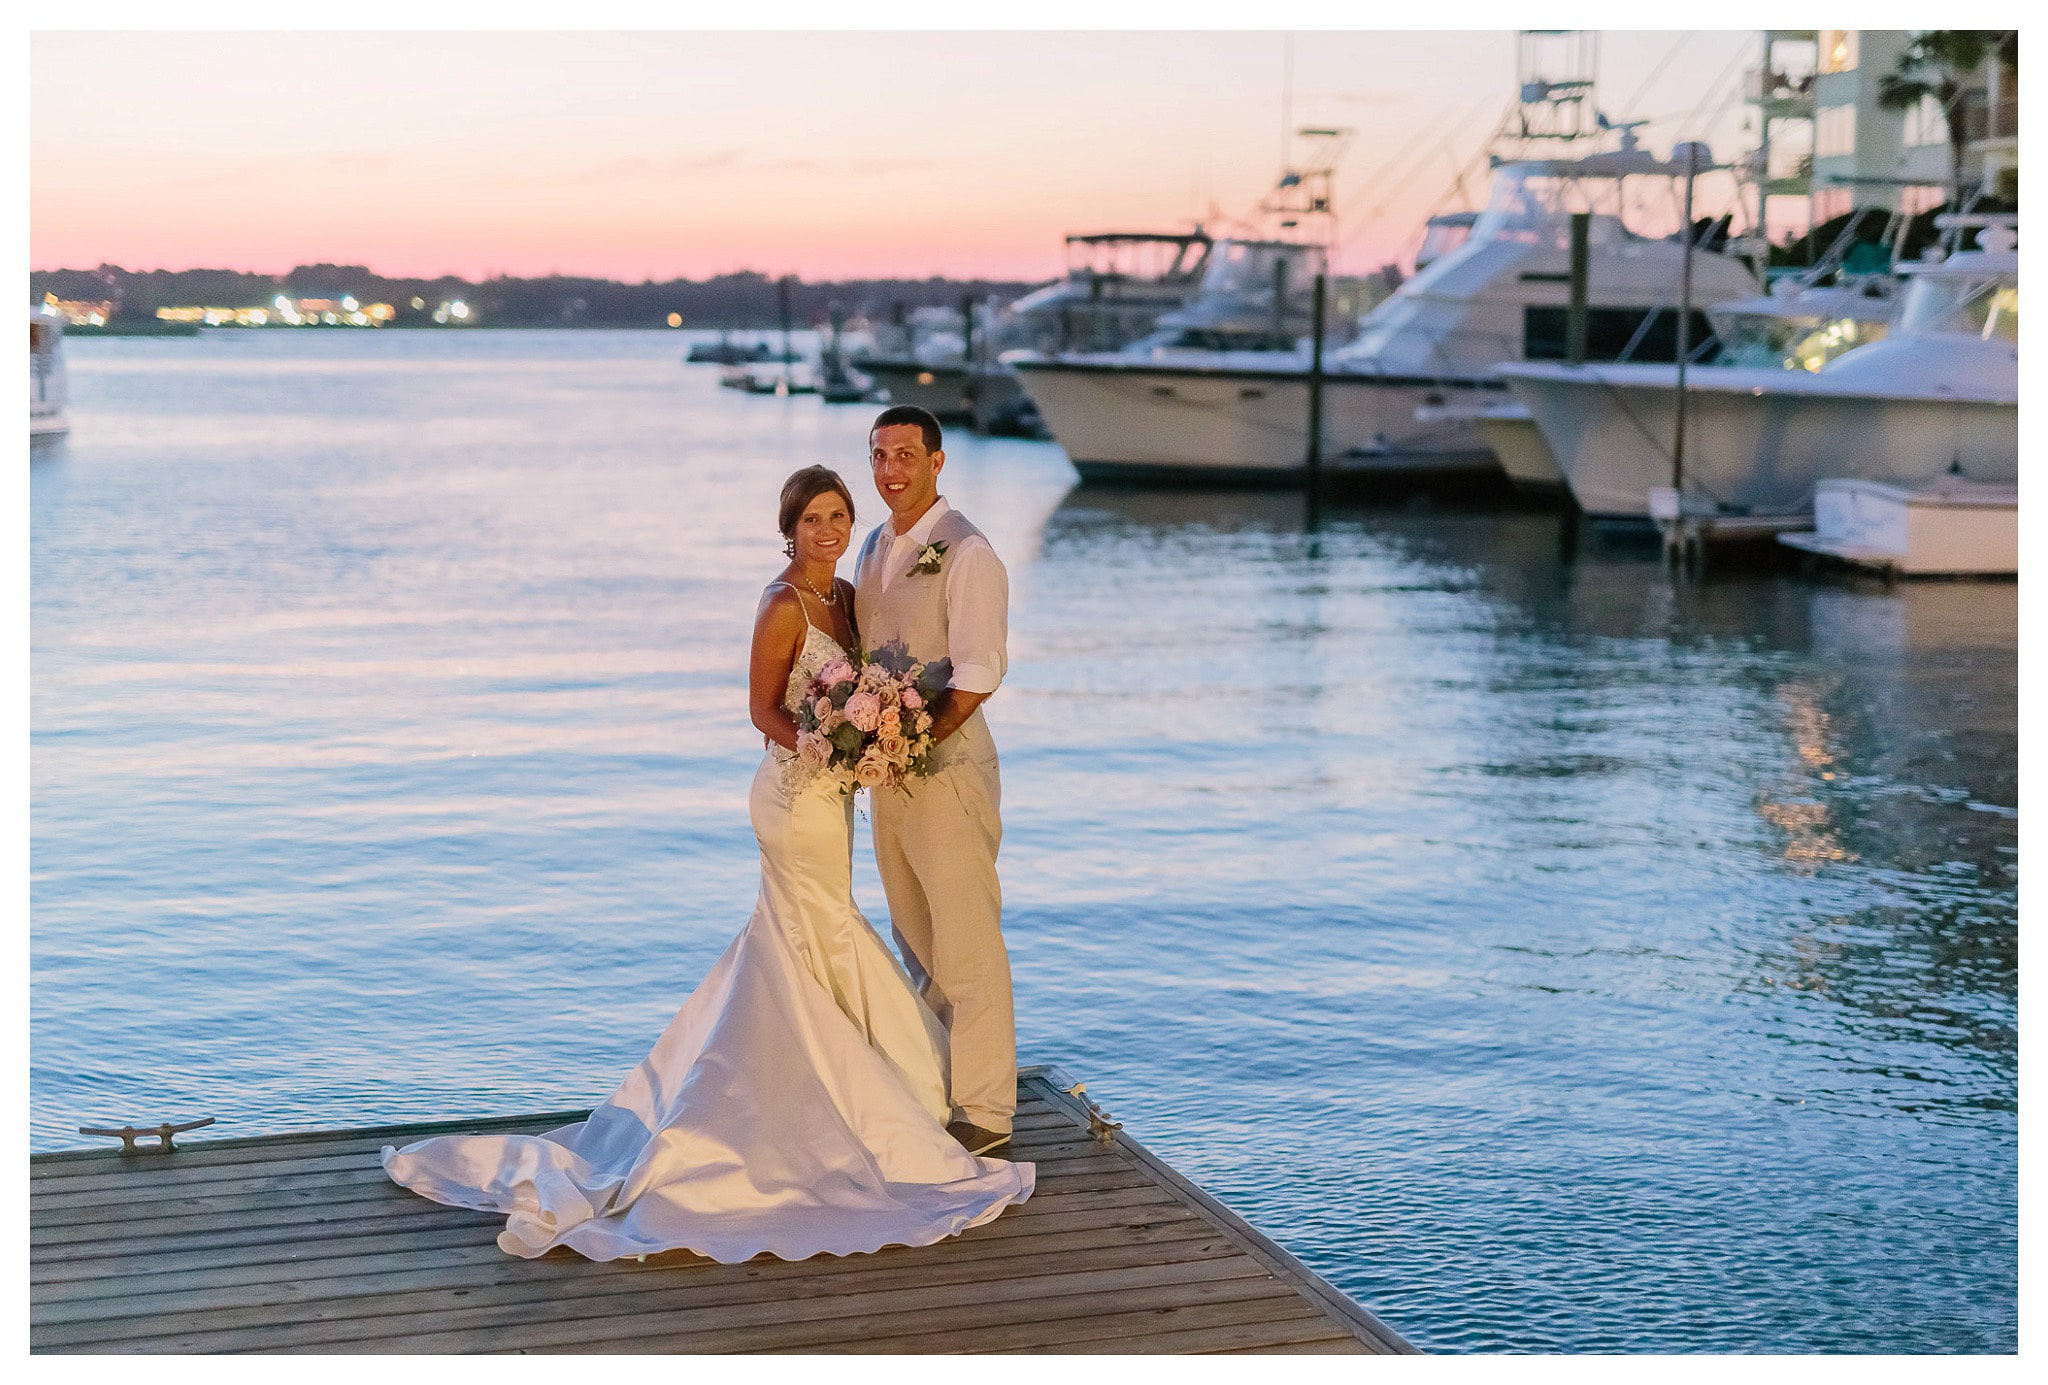 Bride and Groom on the edge of the dock at the marina - Venue - Beach House Gulf Stream Breeze, Beach Realty Catering and Cake - Buttercream Cakes and Catering, LLC Flowers - Callas Florist Event Rentals - Event Works DJ - Scott Shaw